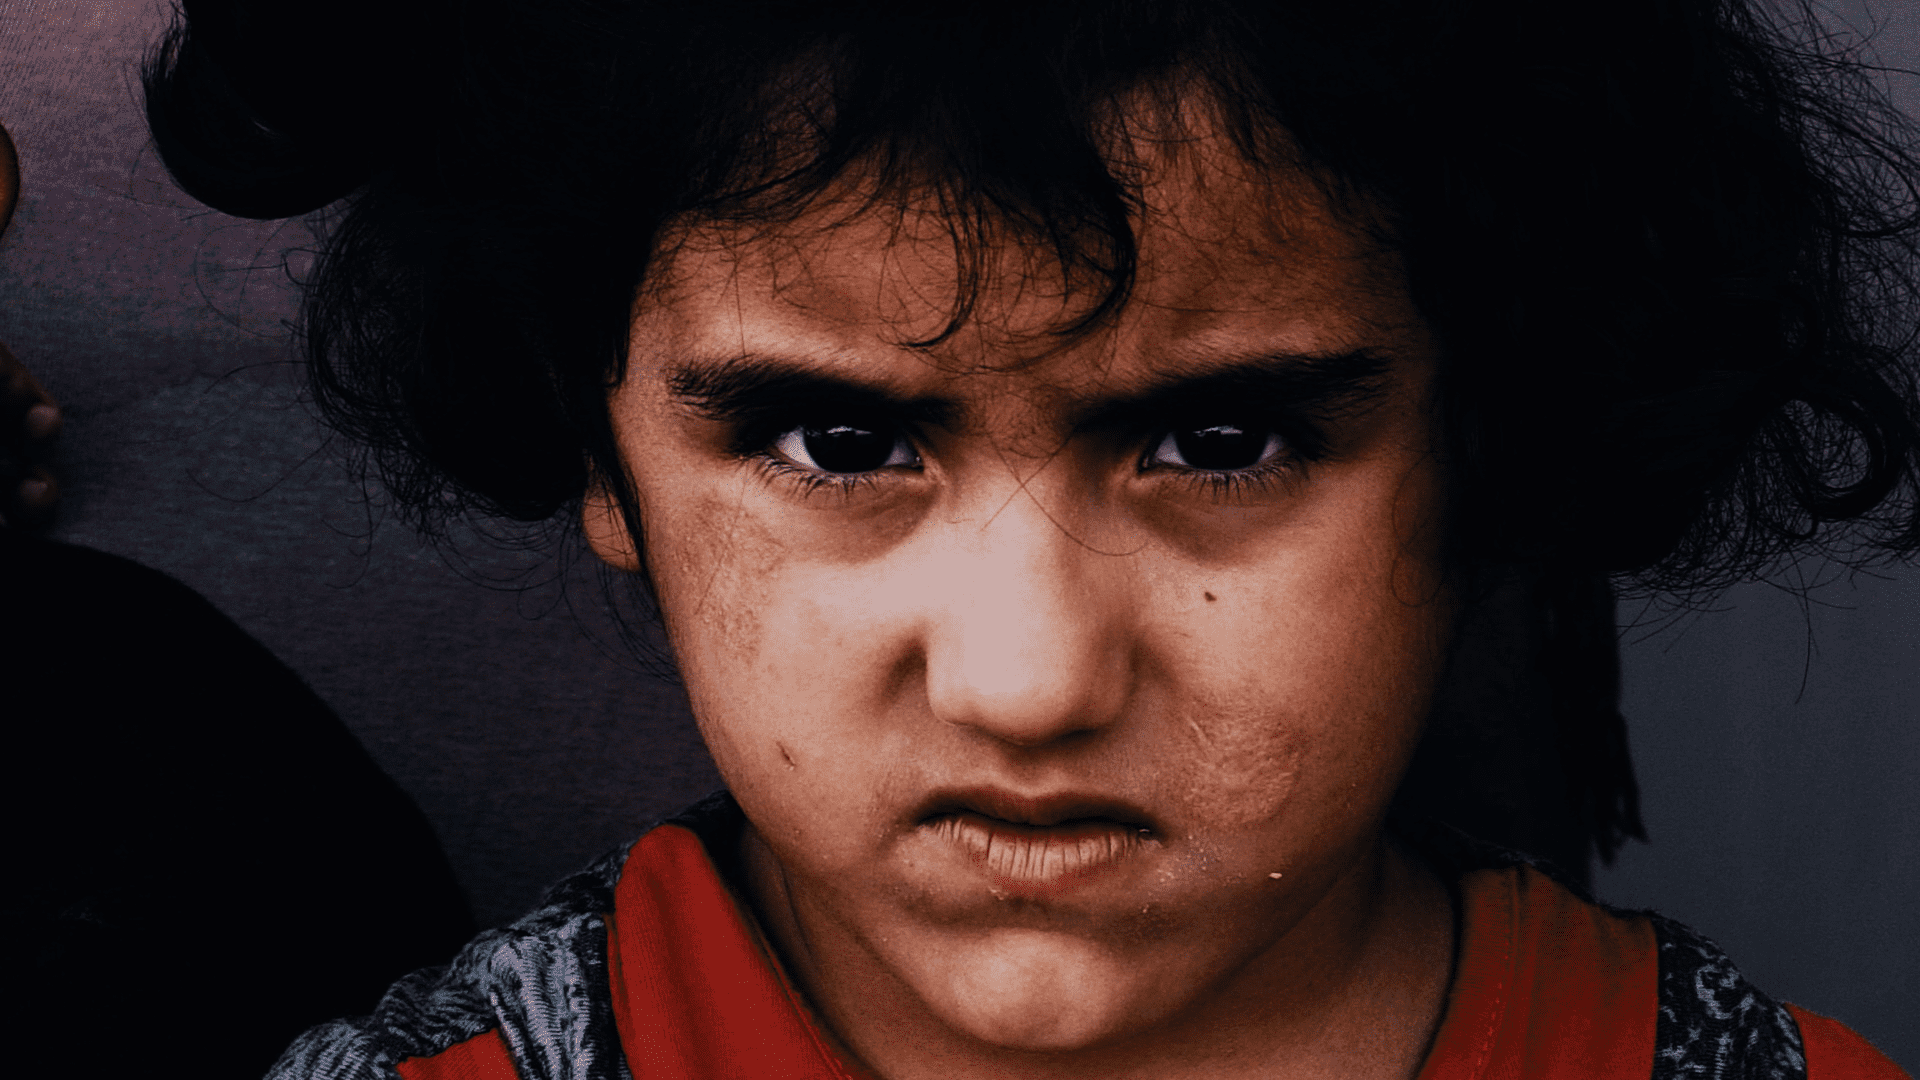 The children of Yazidi families did not escape the extreme cruelty of ISIS. Small boys were held captive and forced to perform weapons training, even if they were physically incapable of holding a gun, while small girls were told they would be shot dead or hanged from a tree if they refused to speak Arabic.